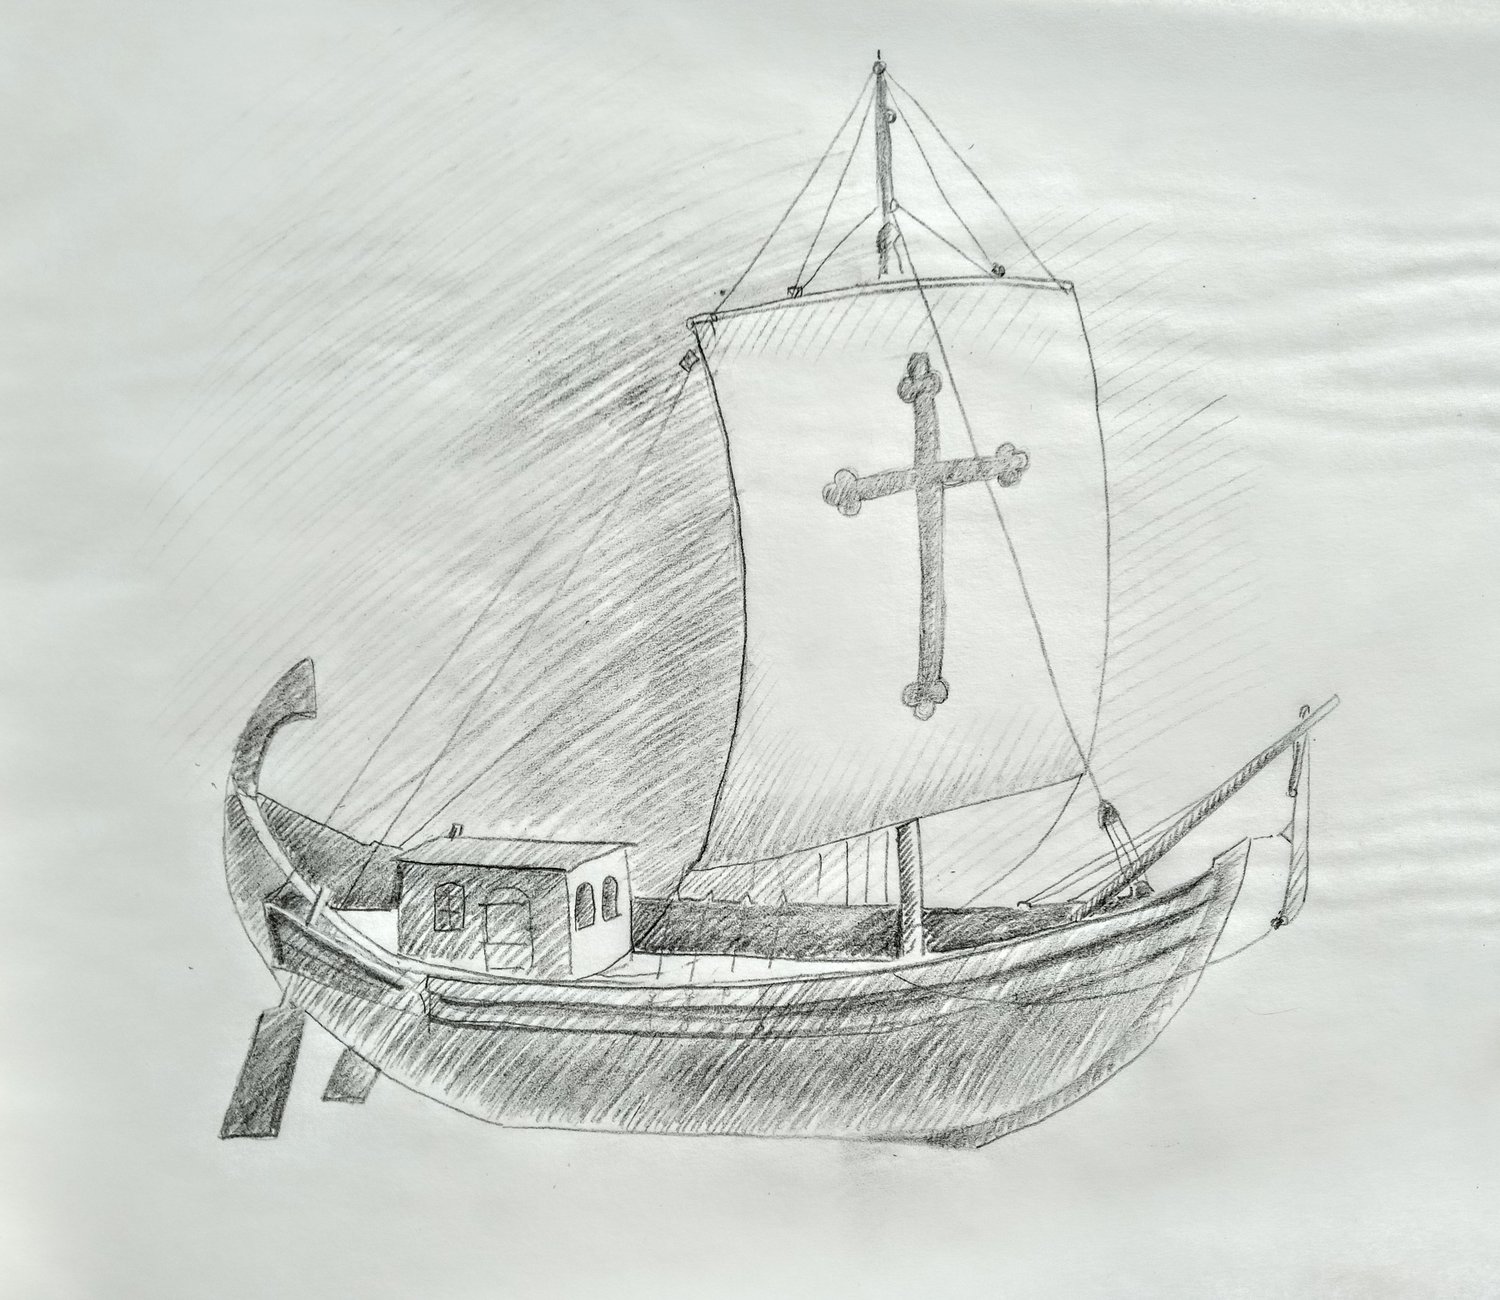 This image of a first-century Roman ship will be used to create part of a bronze relief tympanum over the entrance to the Cathedral of St. Joseph in Jefferson City.